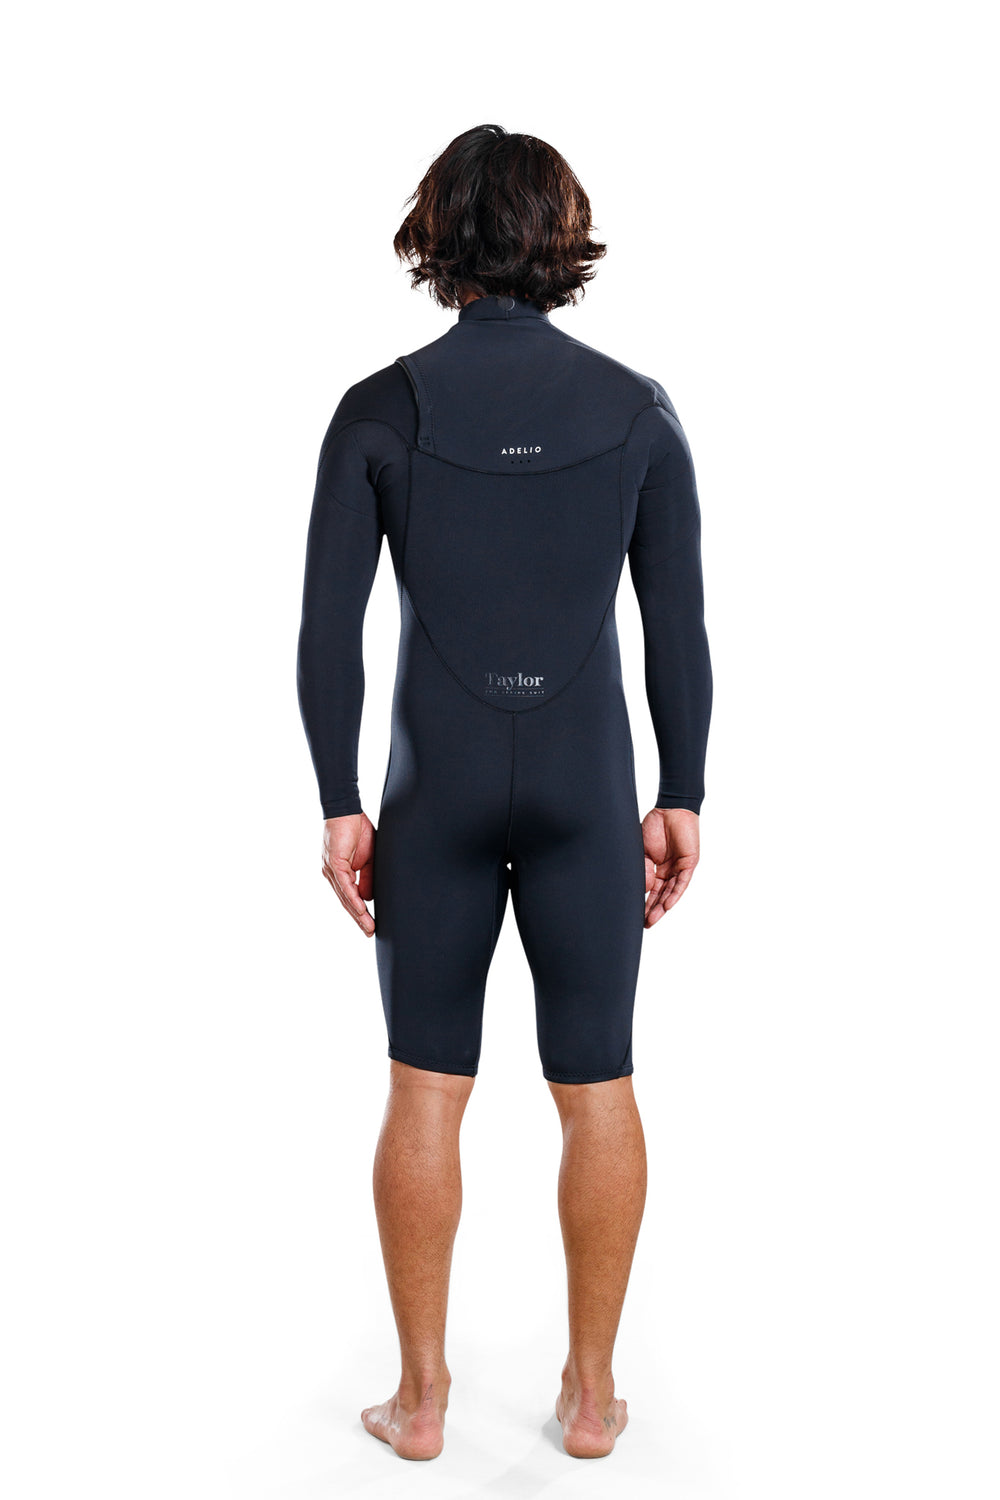 https://us.adelio.co/cdn/shop/products/Adelio_long_arm_taylor_spring_suit_wetsuit_back_1000x.jpg?v=1610048254